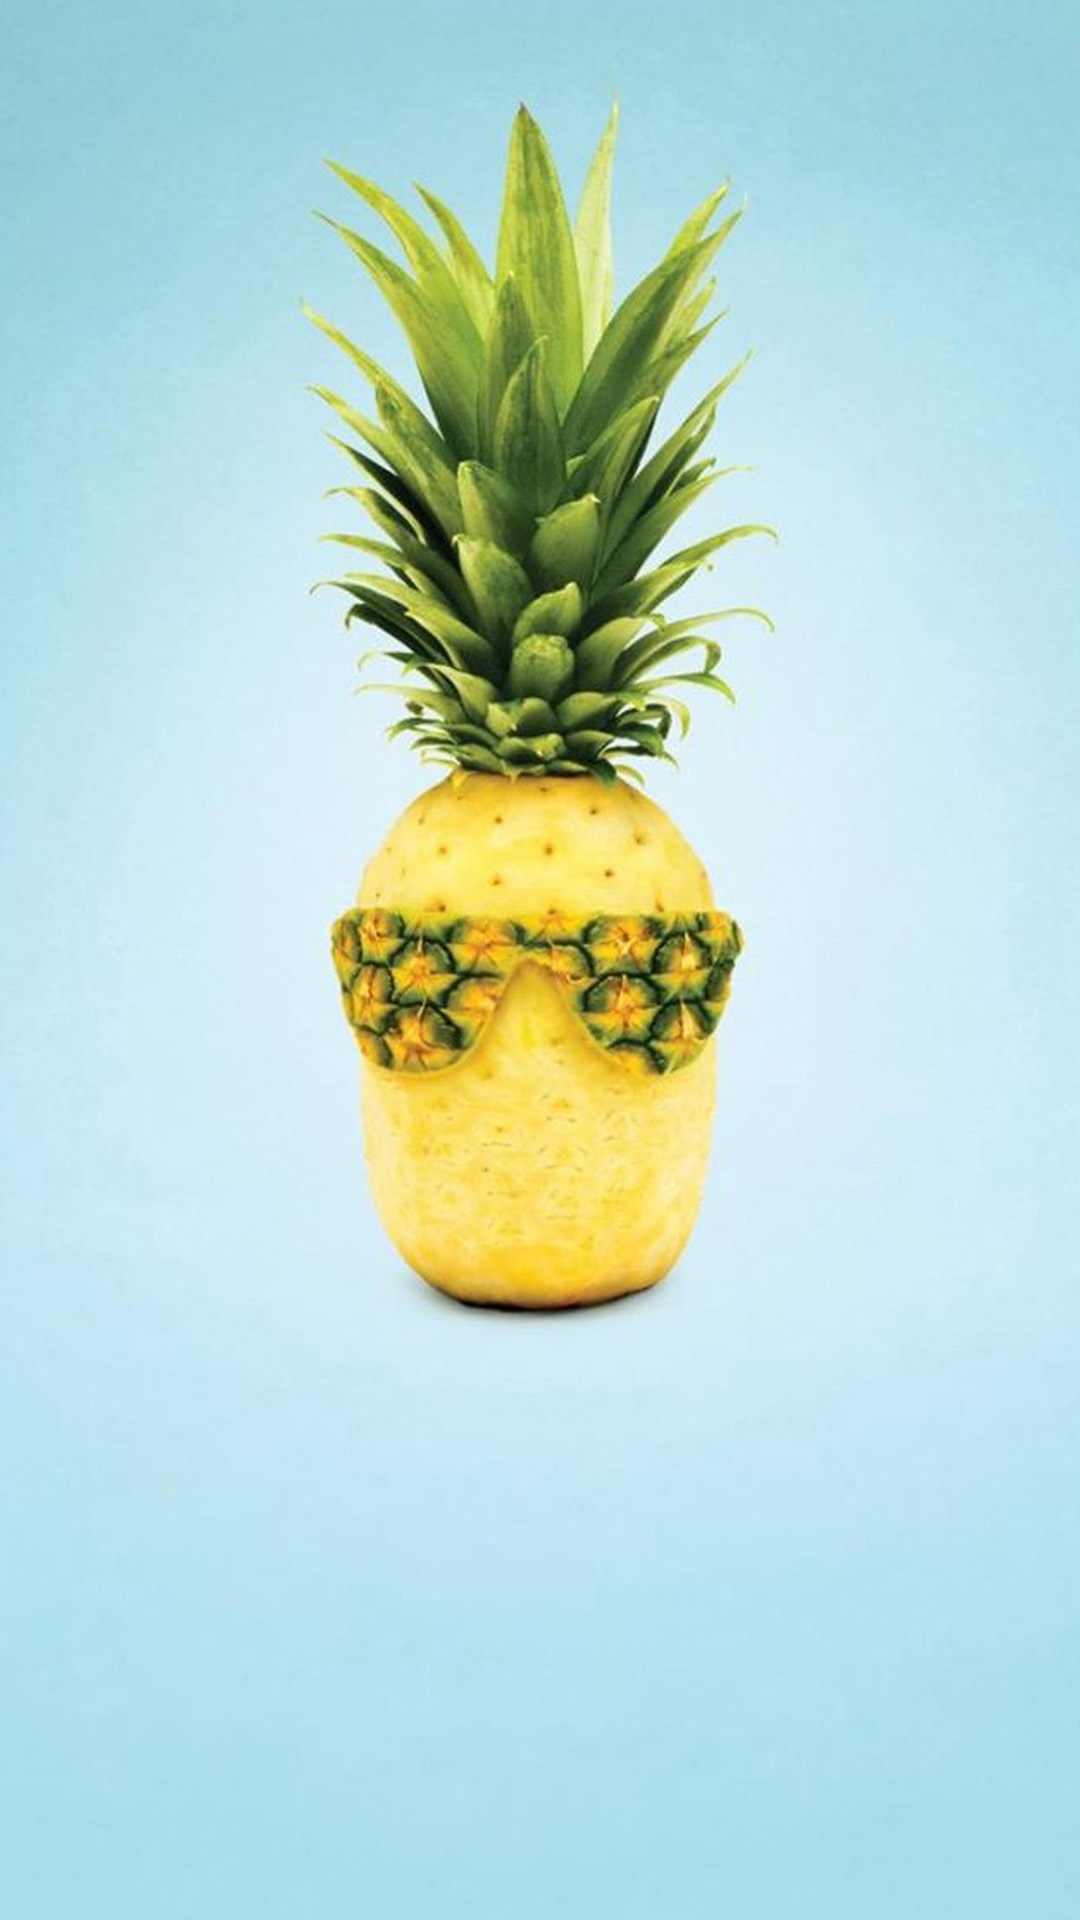 Cute Lovely Pineapple Fruit Wallpaper iPhone resolution 1080x1920